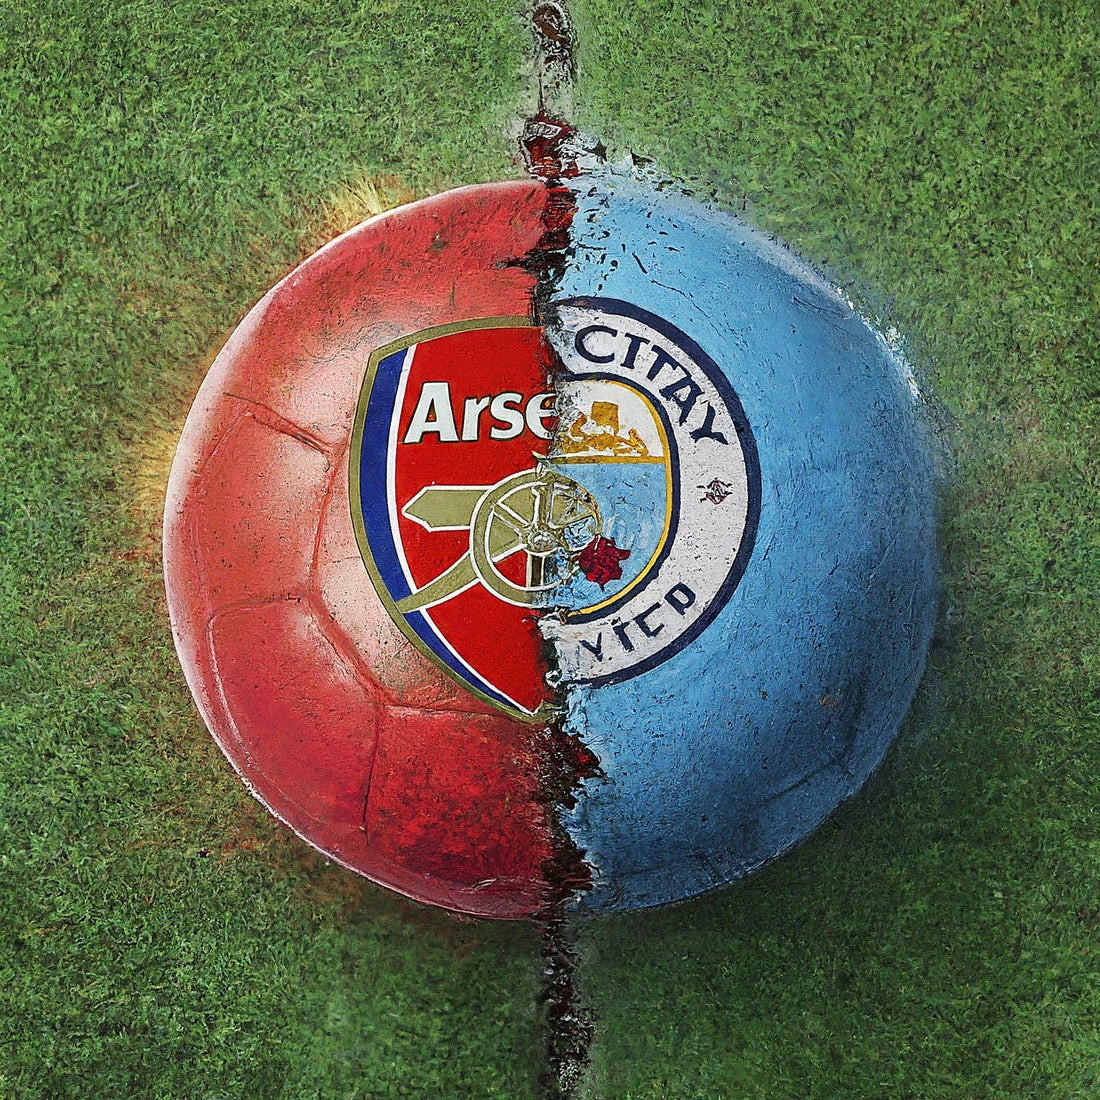 How Many Times Has Arsenal Beaten Man City? Manchester City vs Arsenal Preview: Title Race Heats Up at the Etihad